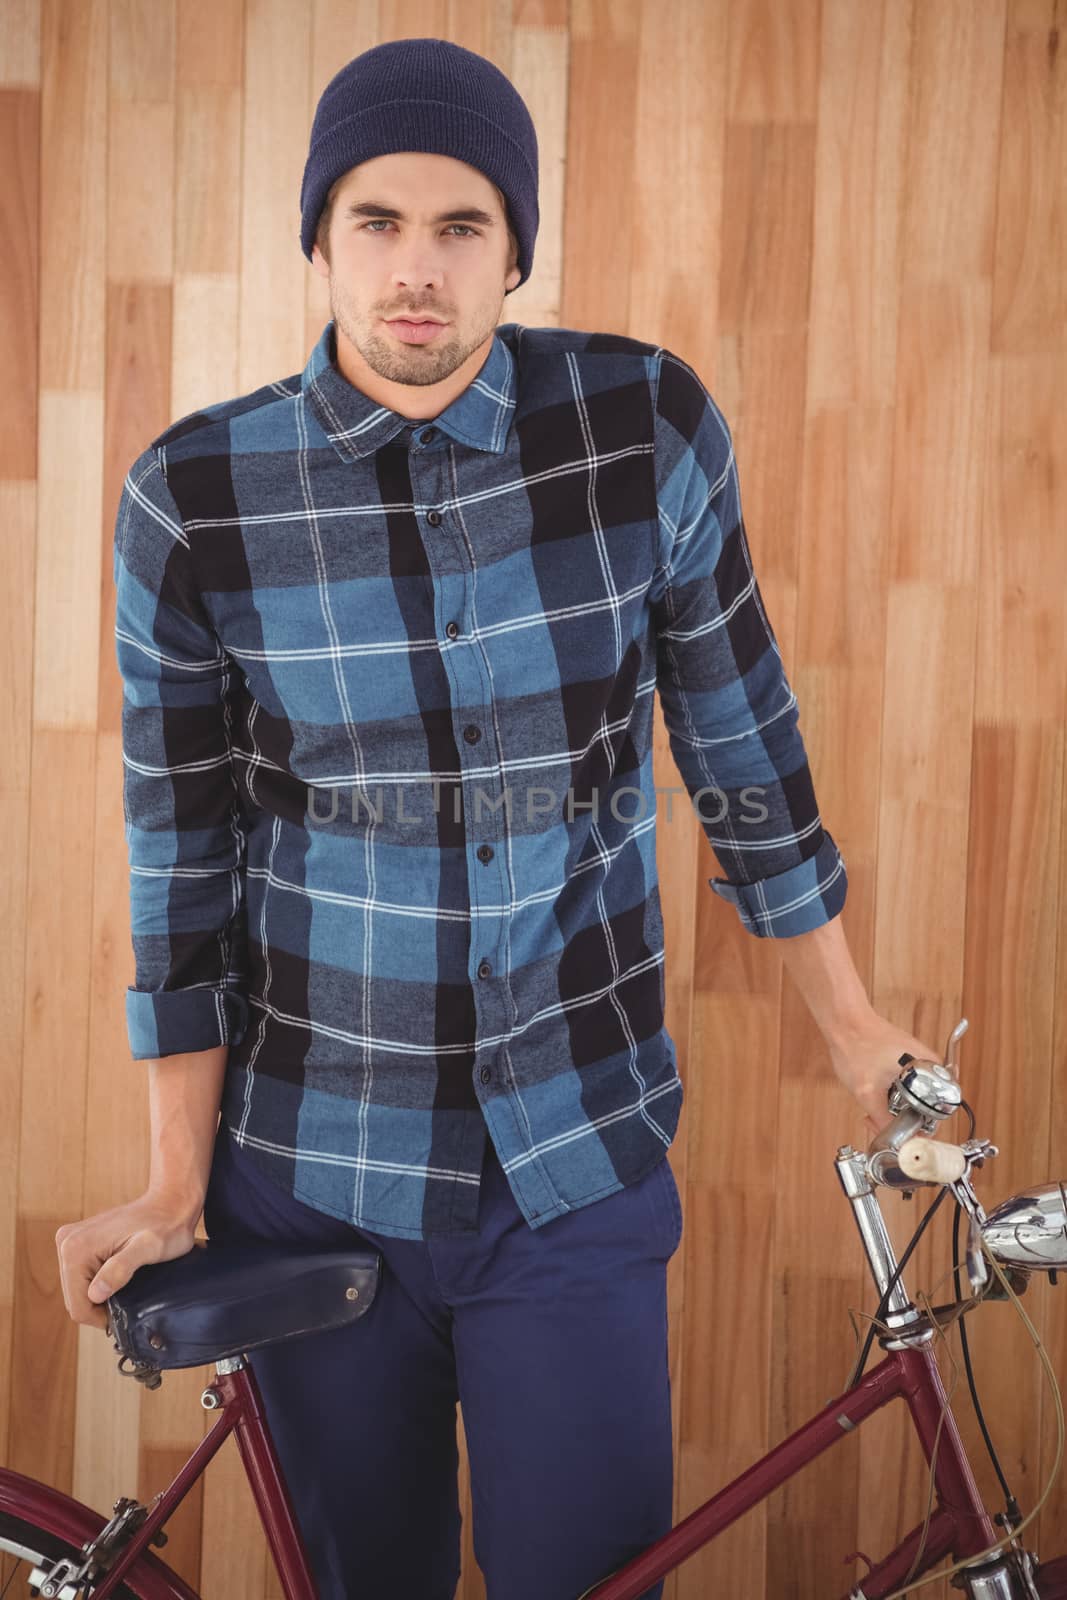 Portrait of hipster standing with bicycle against wooden wall